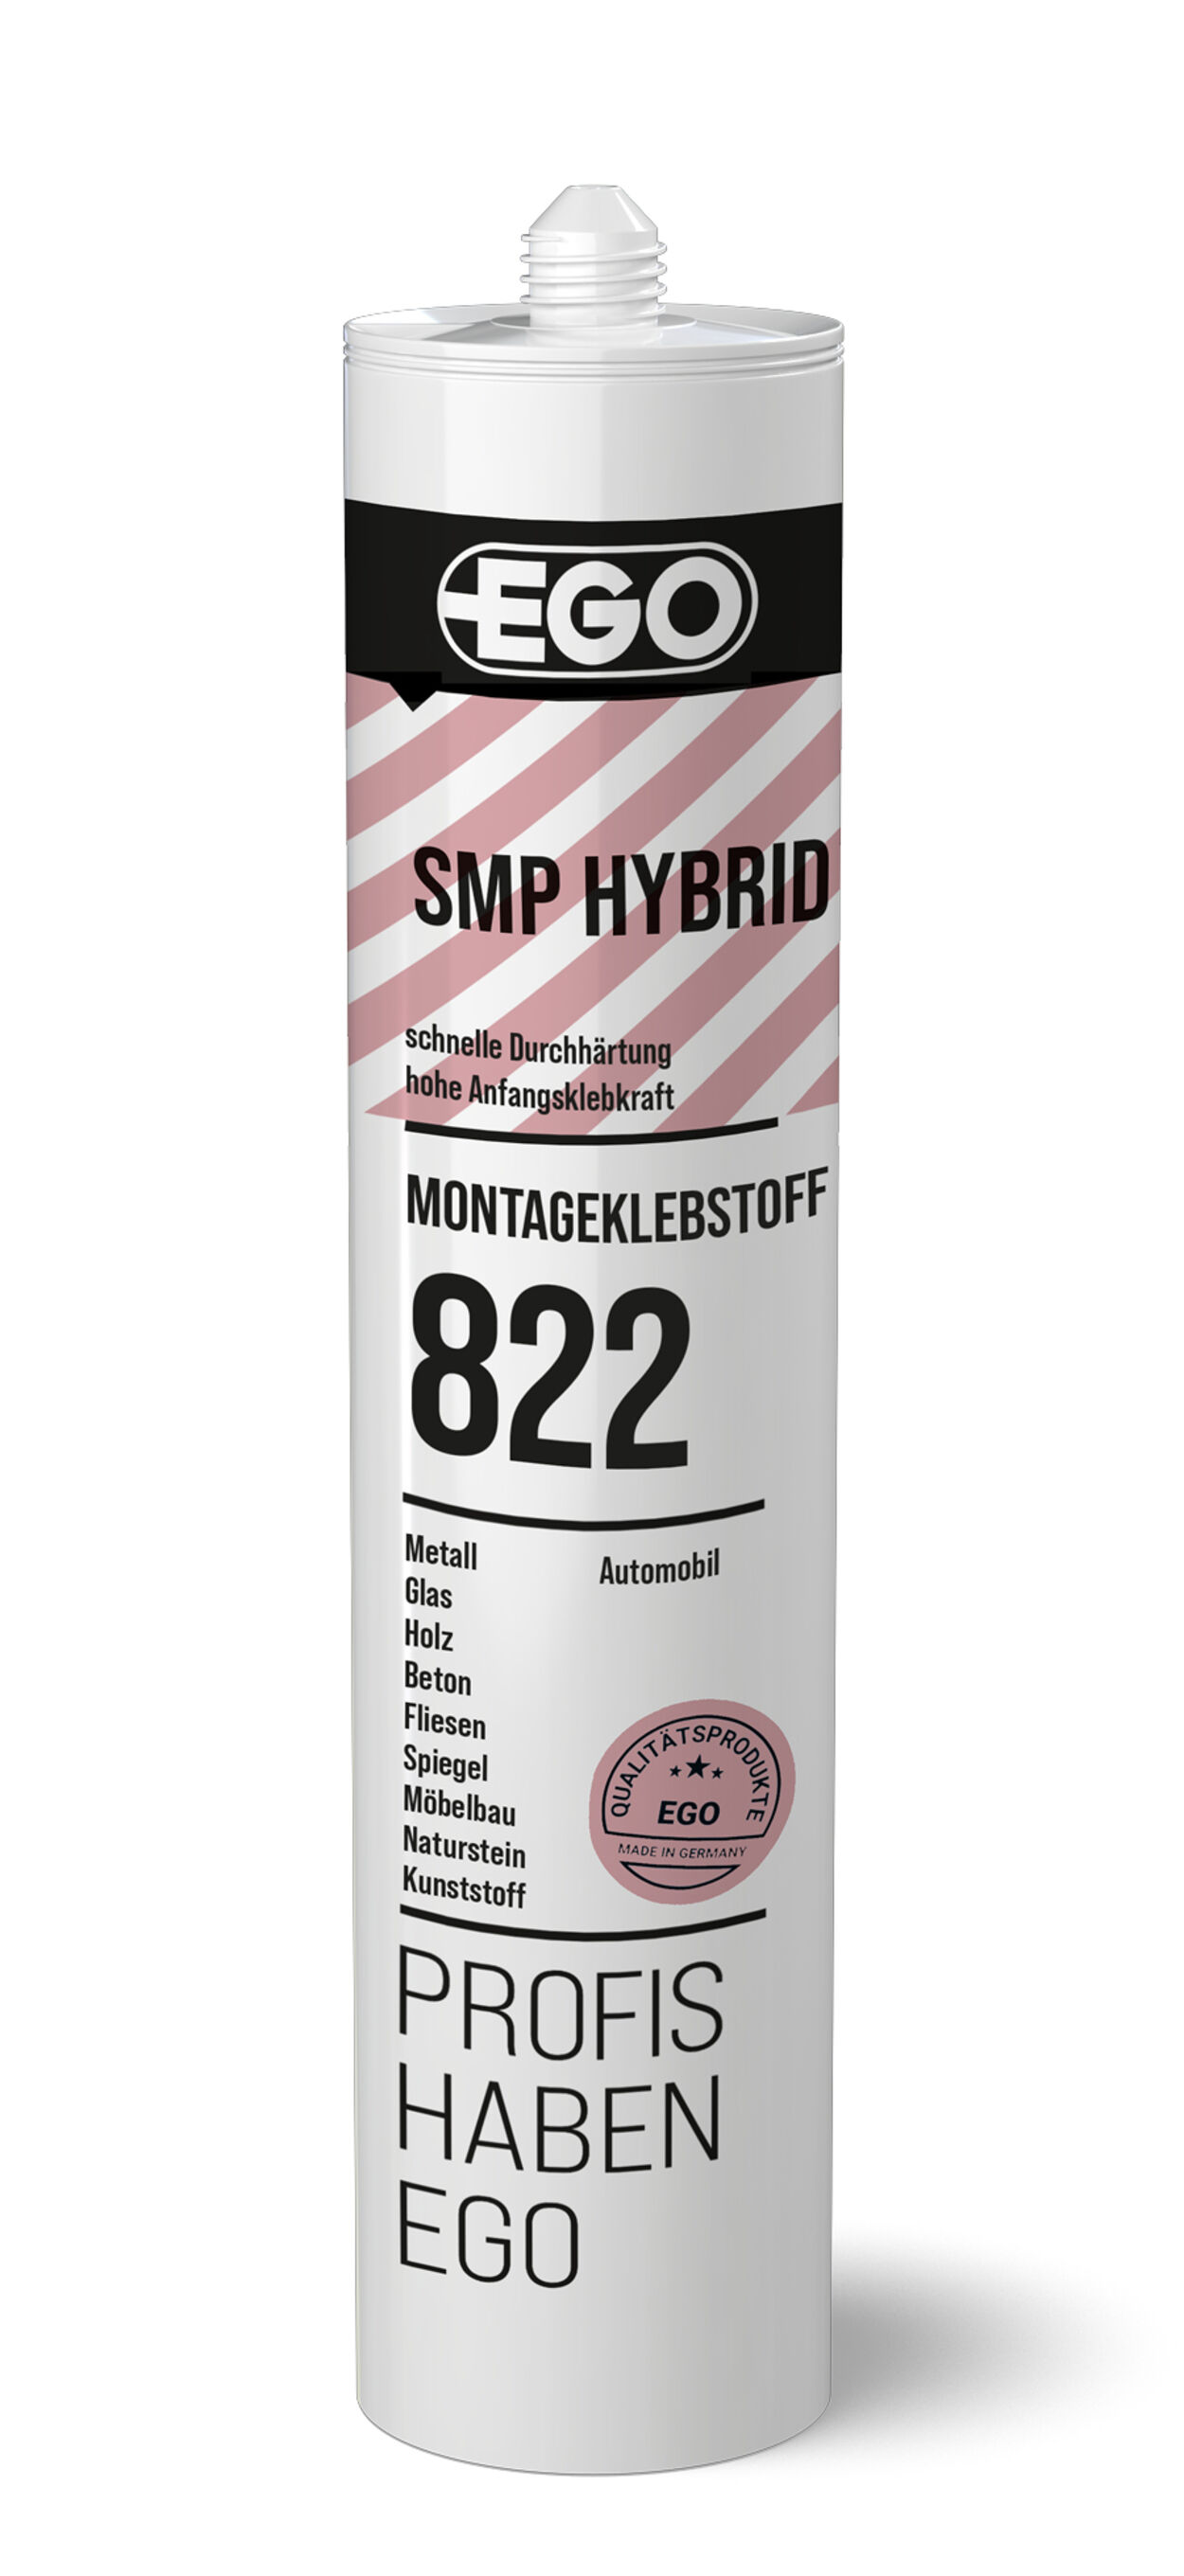 SMP hybrid   assembly adhesive for construction applications